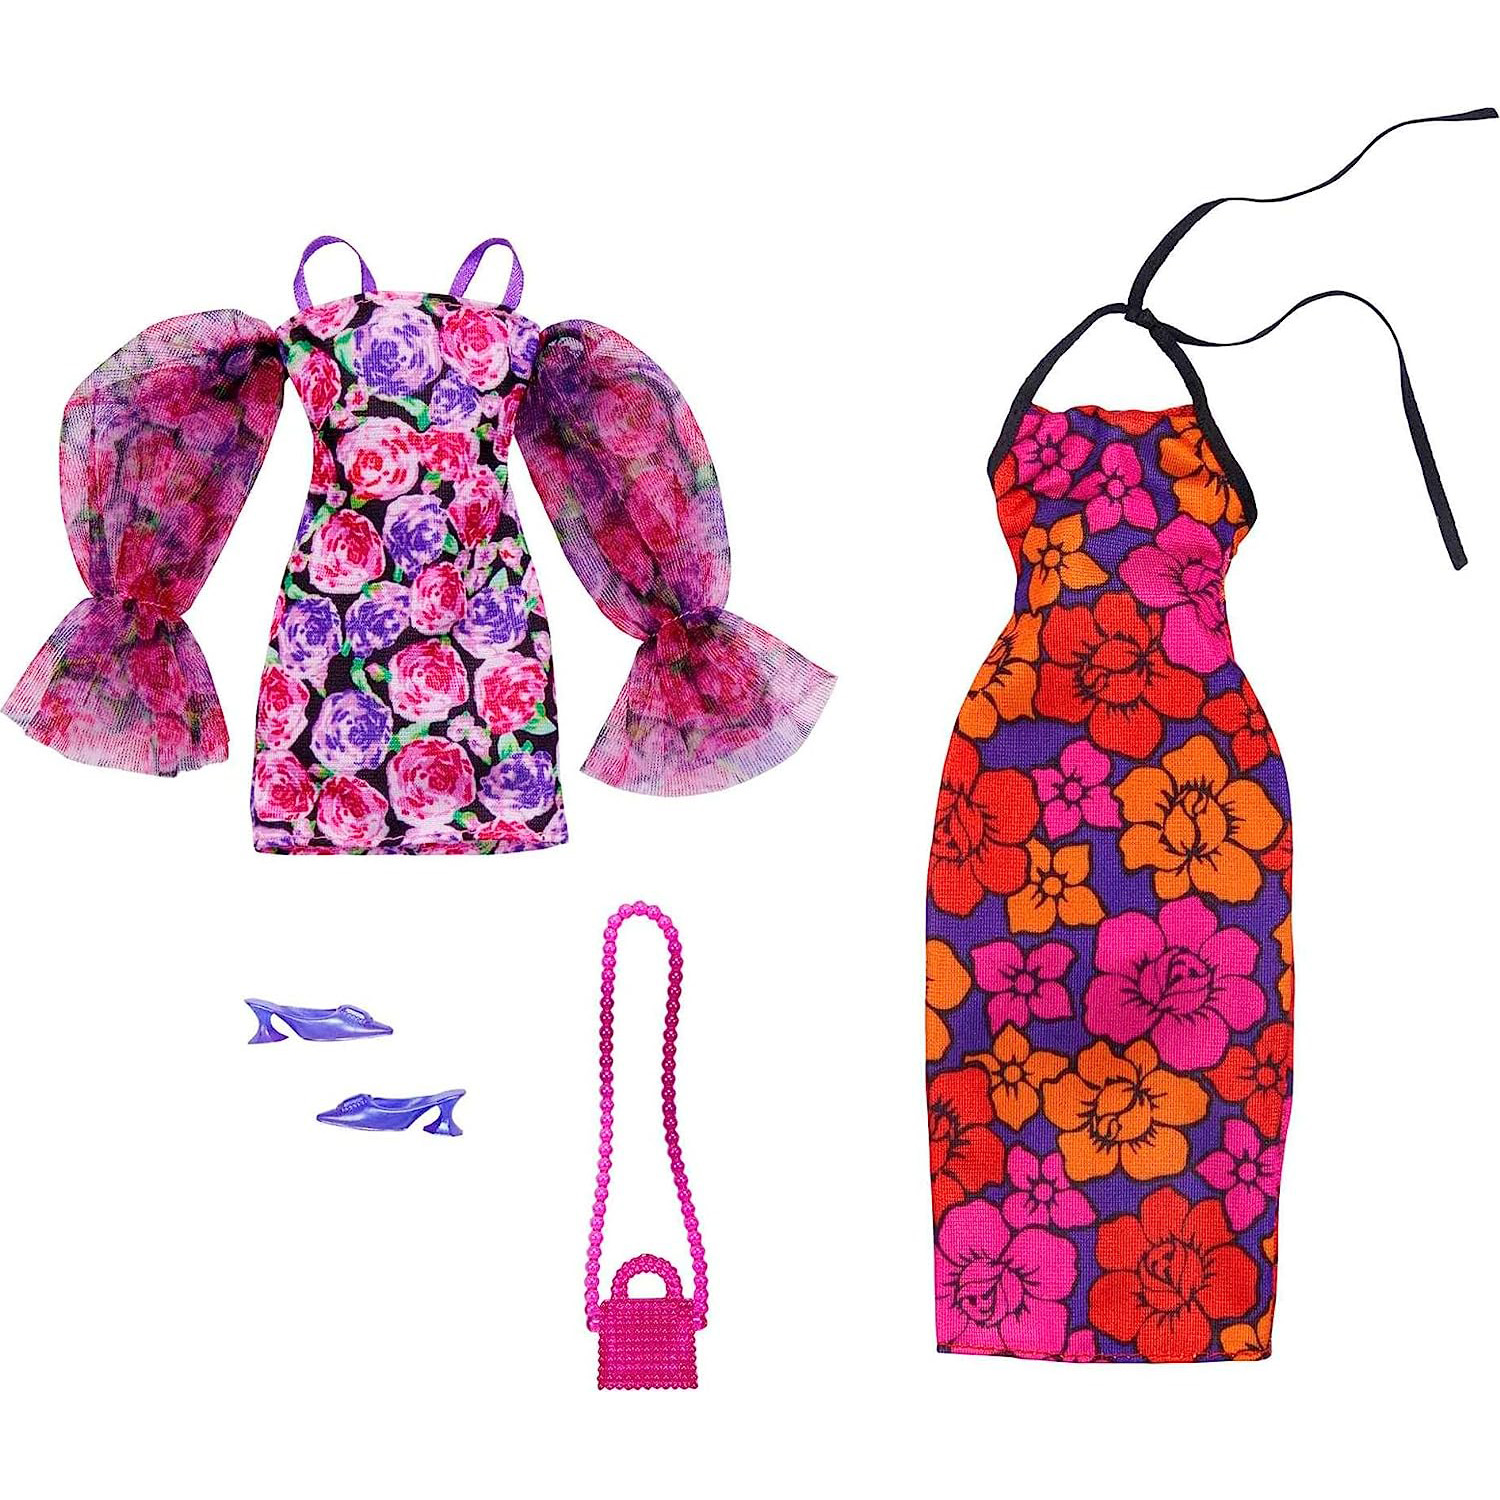 Barbie Clothes&comma; Fashion and Accessory 2-Pack Dolls&comma; 2 Dressy Floral-Themed Outfits with Styling Pieces for Complete Looks